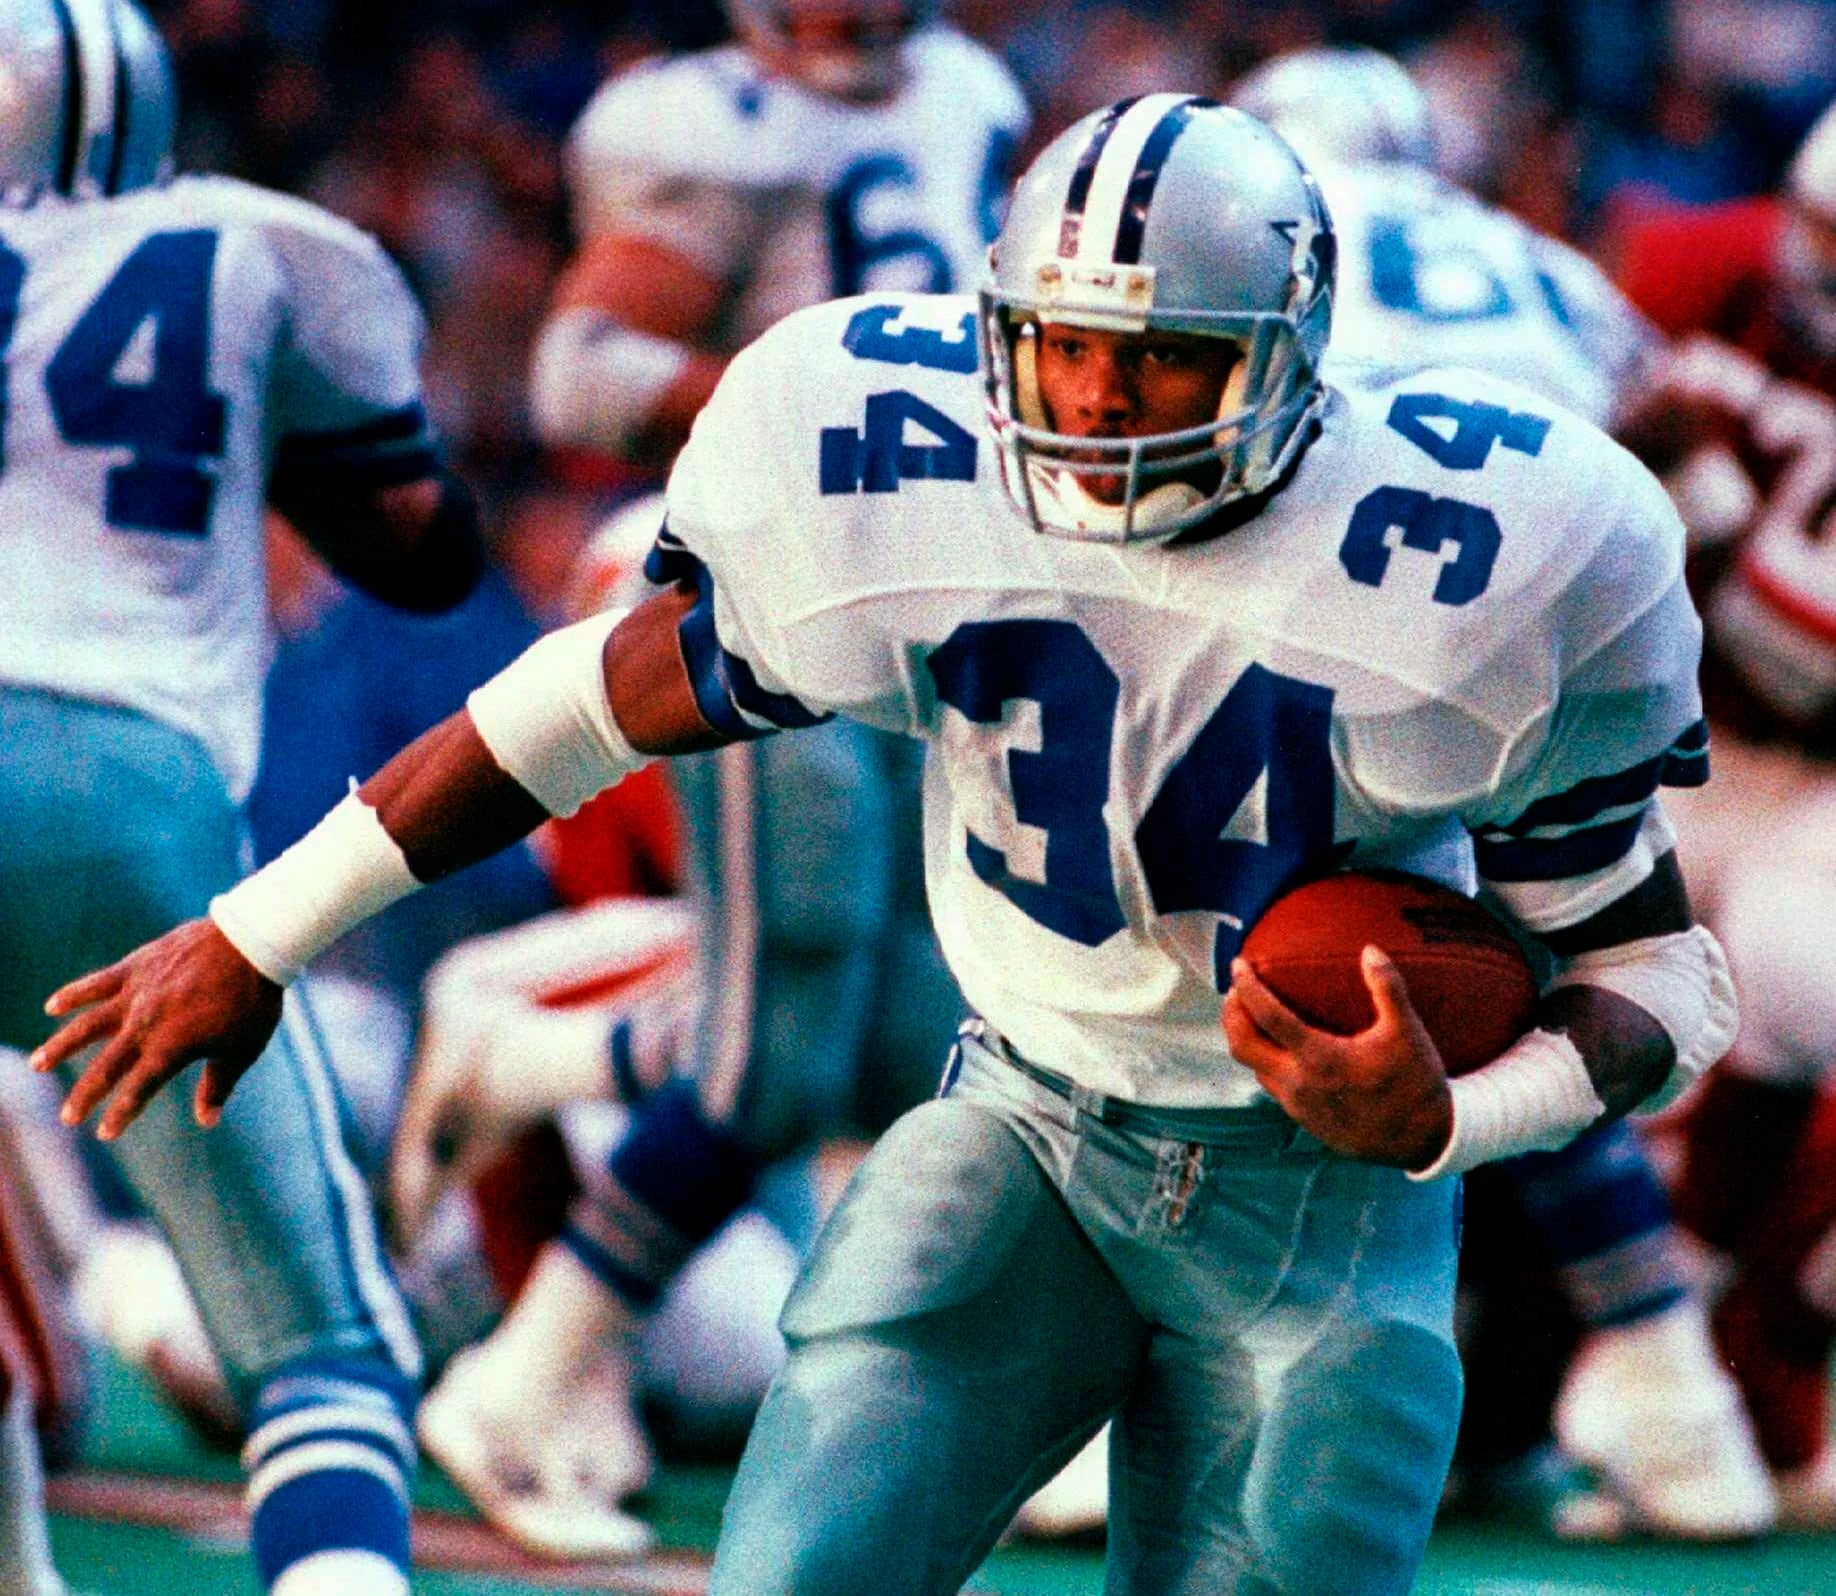 In probably the biggest NFL trade deadline deal, the Cowboys sent Herschel Walker to the Vikings. 